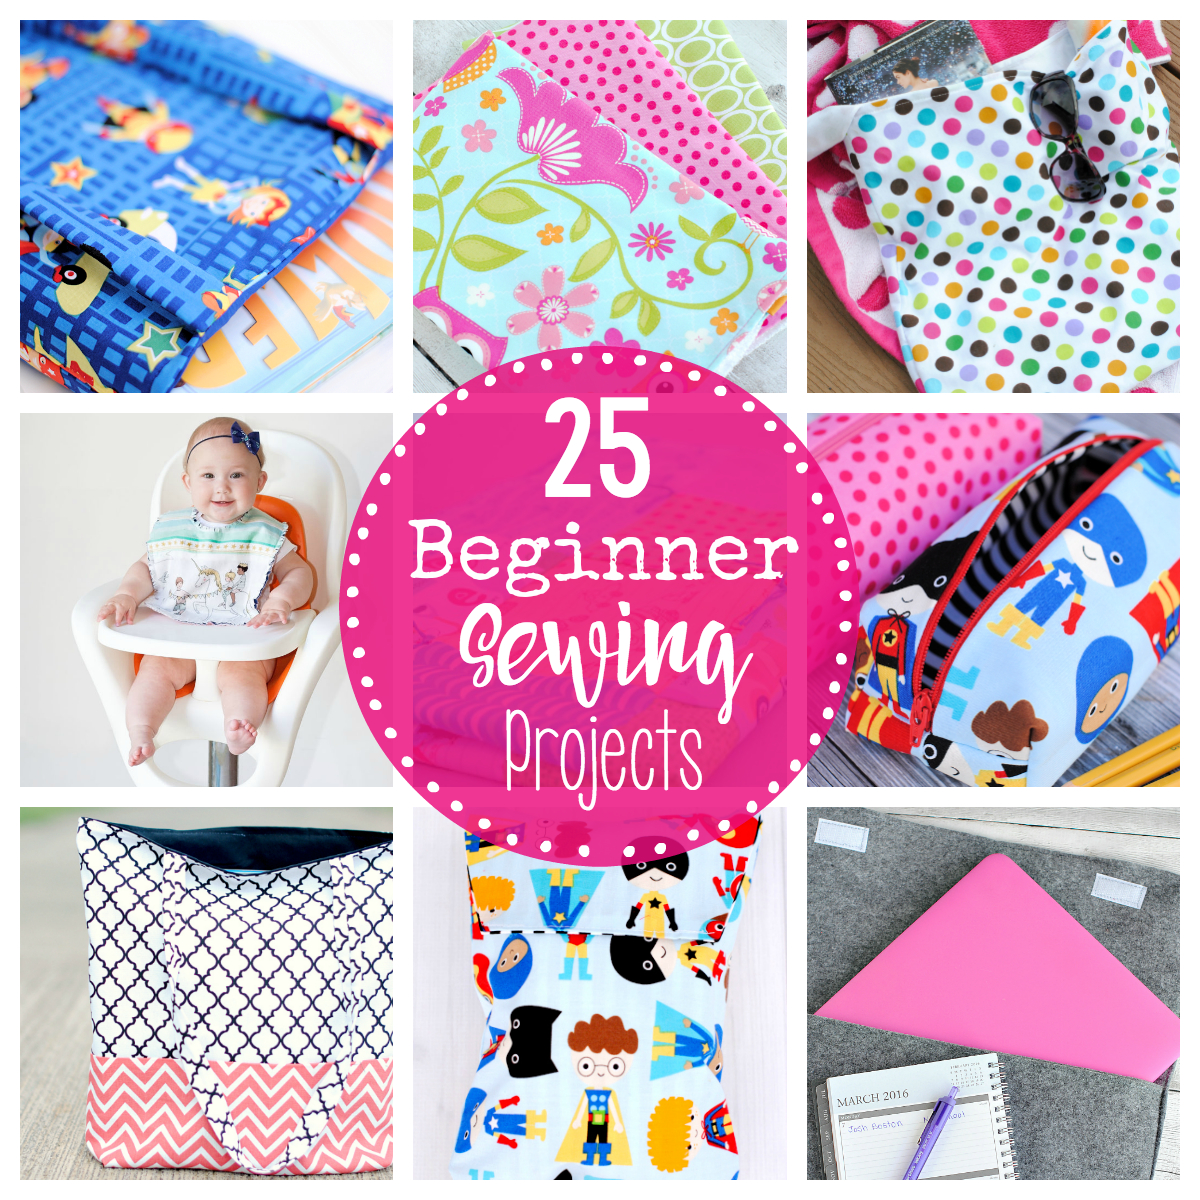 Simple Sewing Patterns 25 Beginner Sewing Projects